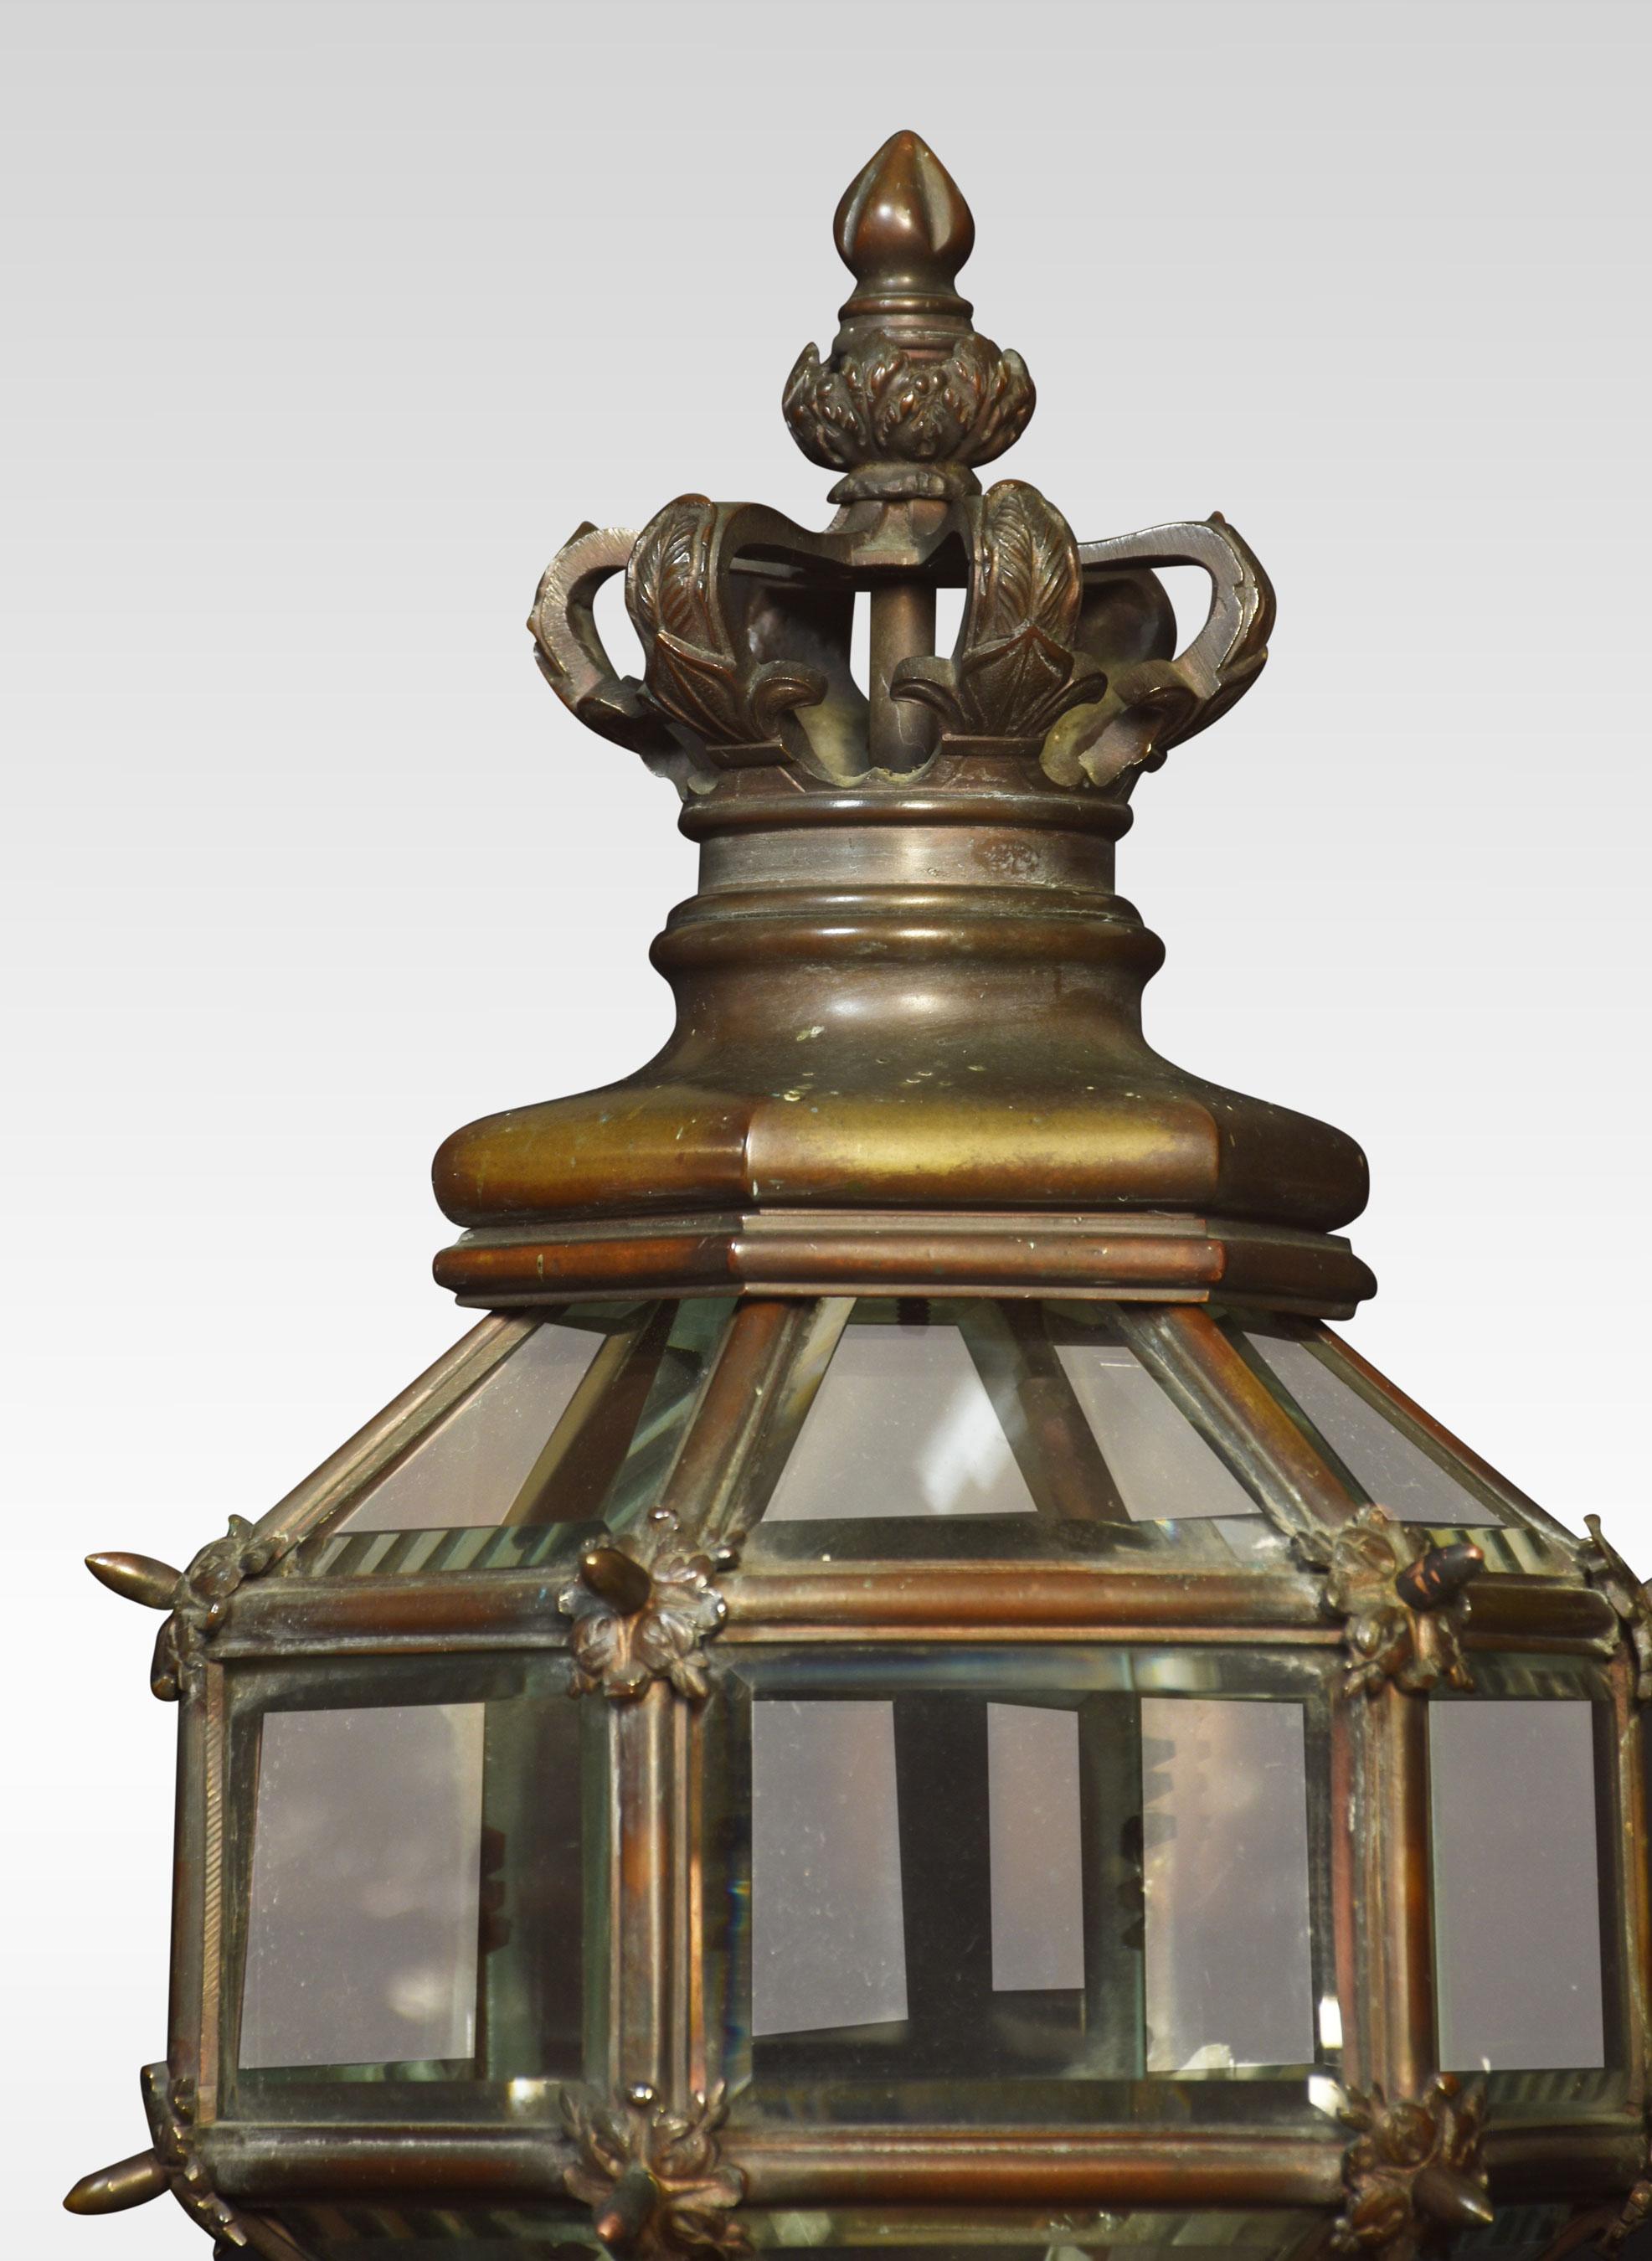 Pair of bronze newel post lamps, the crown tops above hexagonal glazed lantern raised up on reeded stem and circular bases. The lamps have been rewired.
Dimensions
height 37 inches
width 9.5 inches
depth 9.5 inches.
 